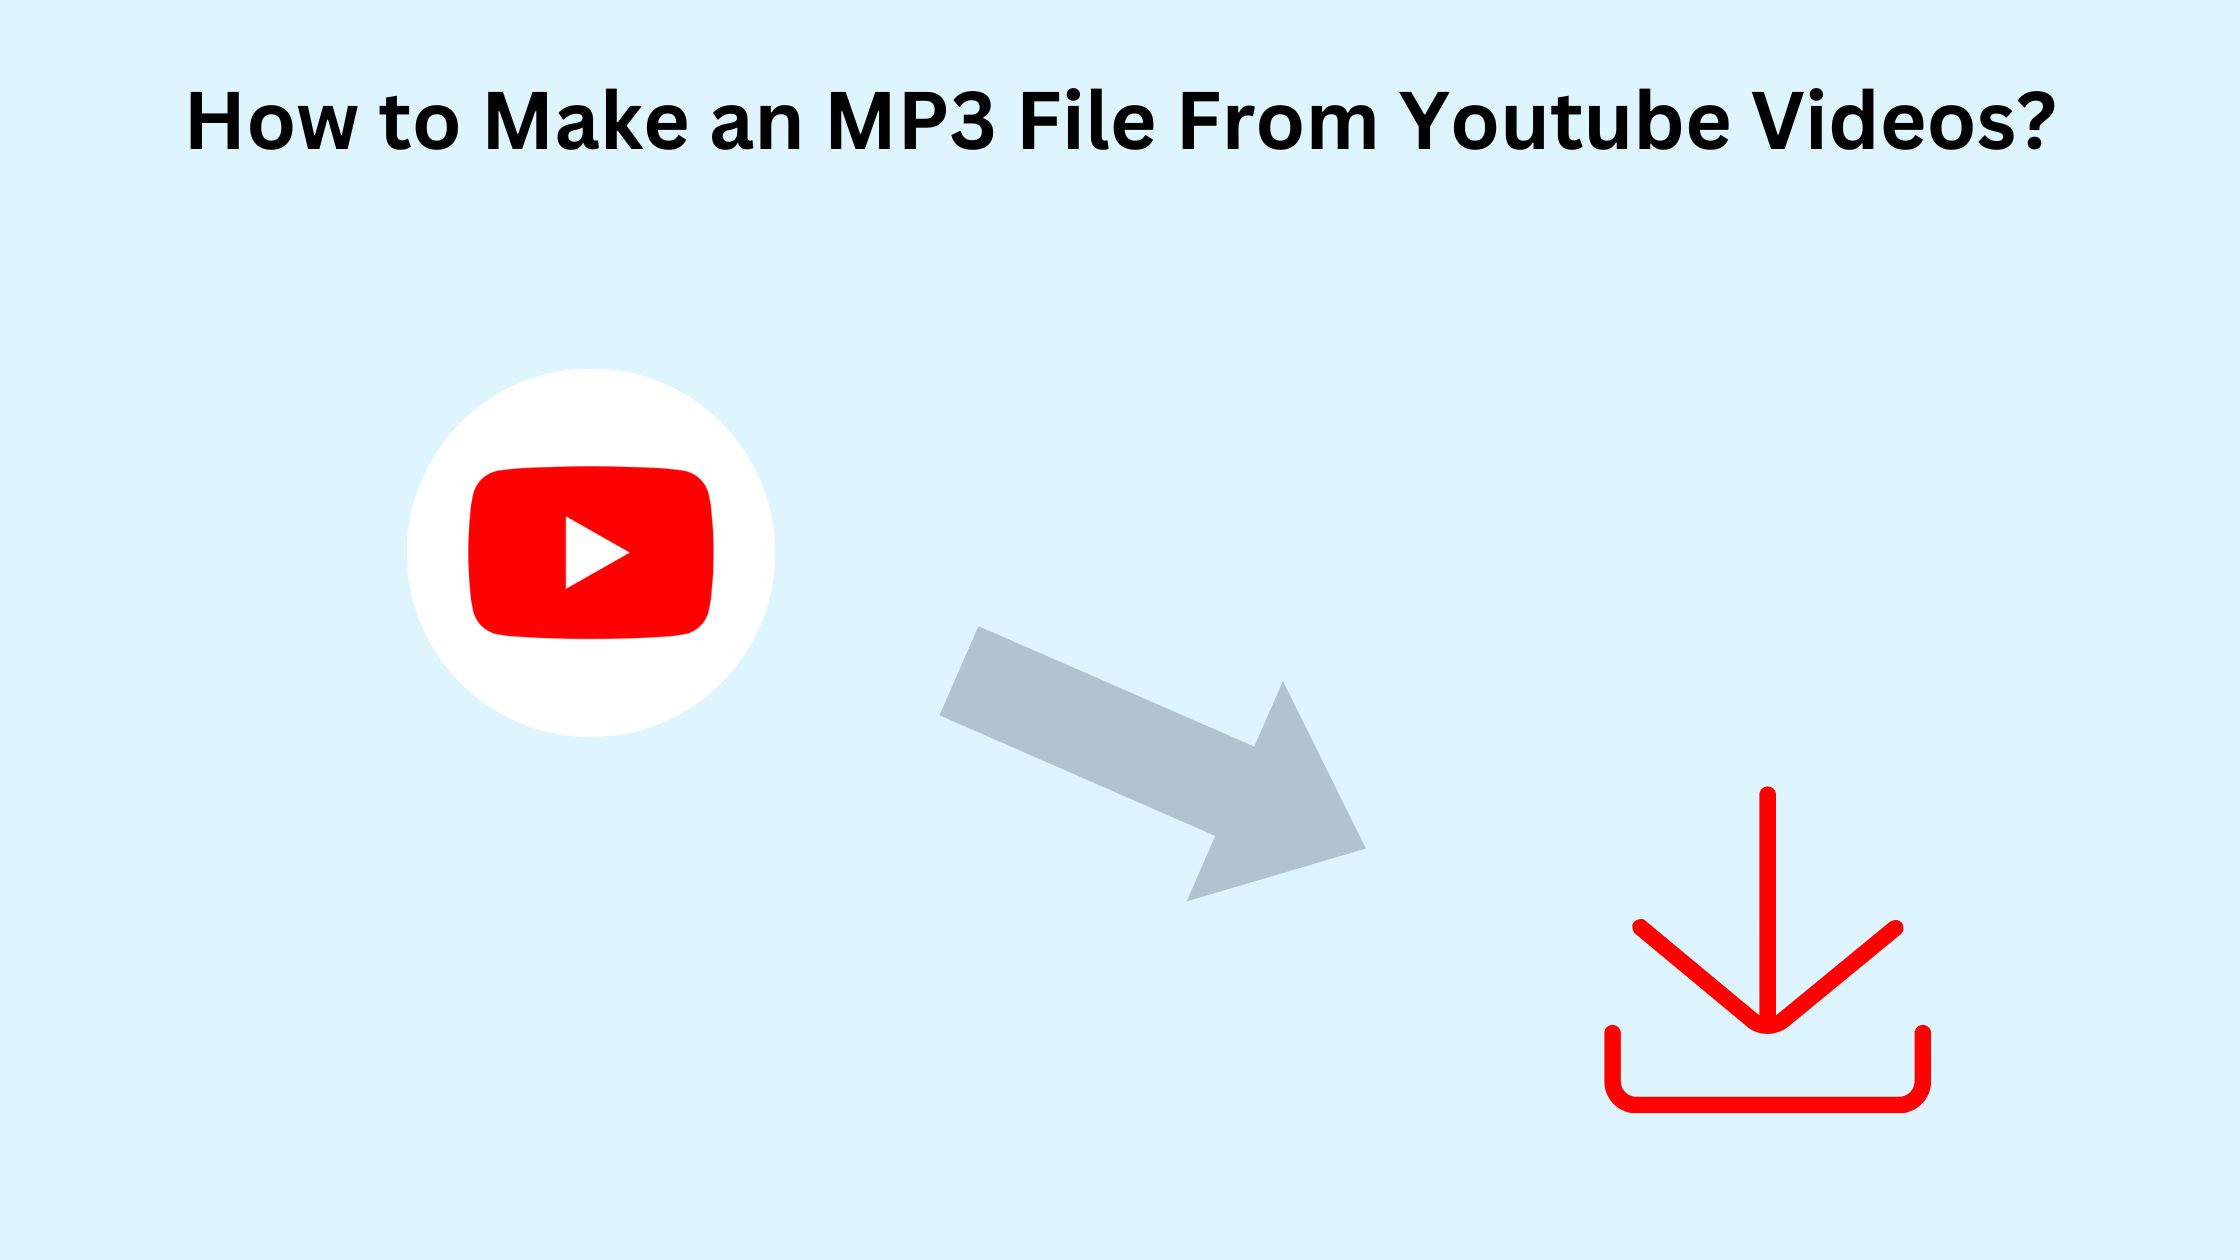 How to Make an MP3 File From YouTube Videos?